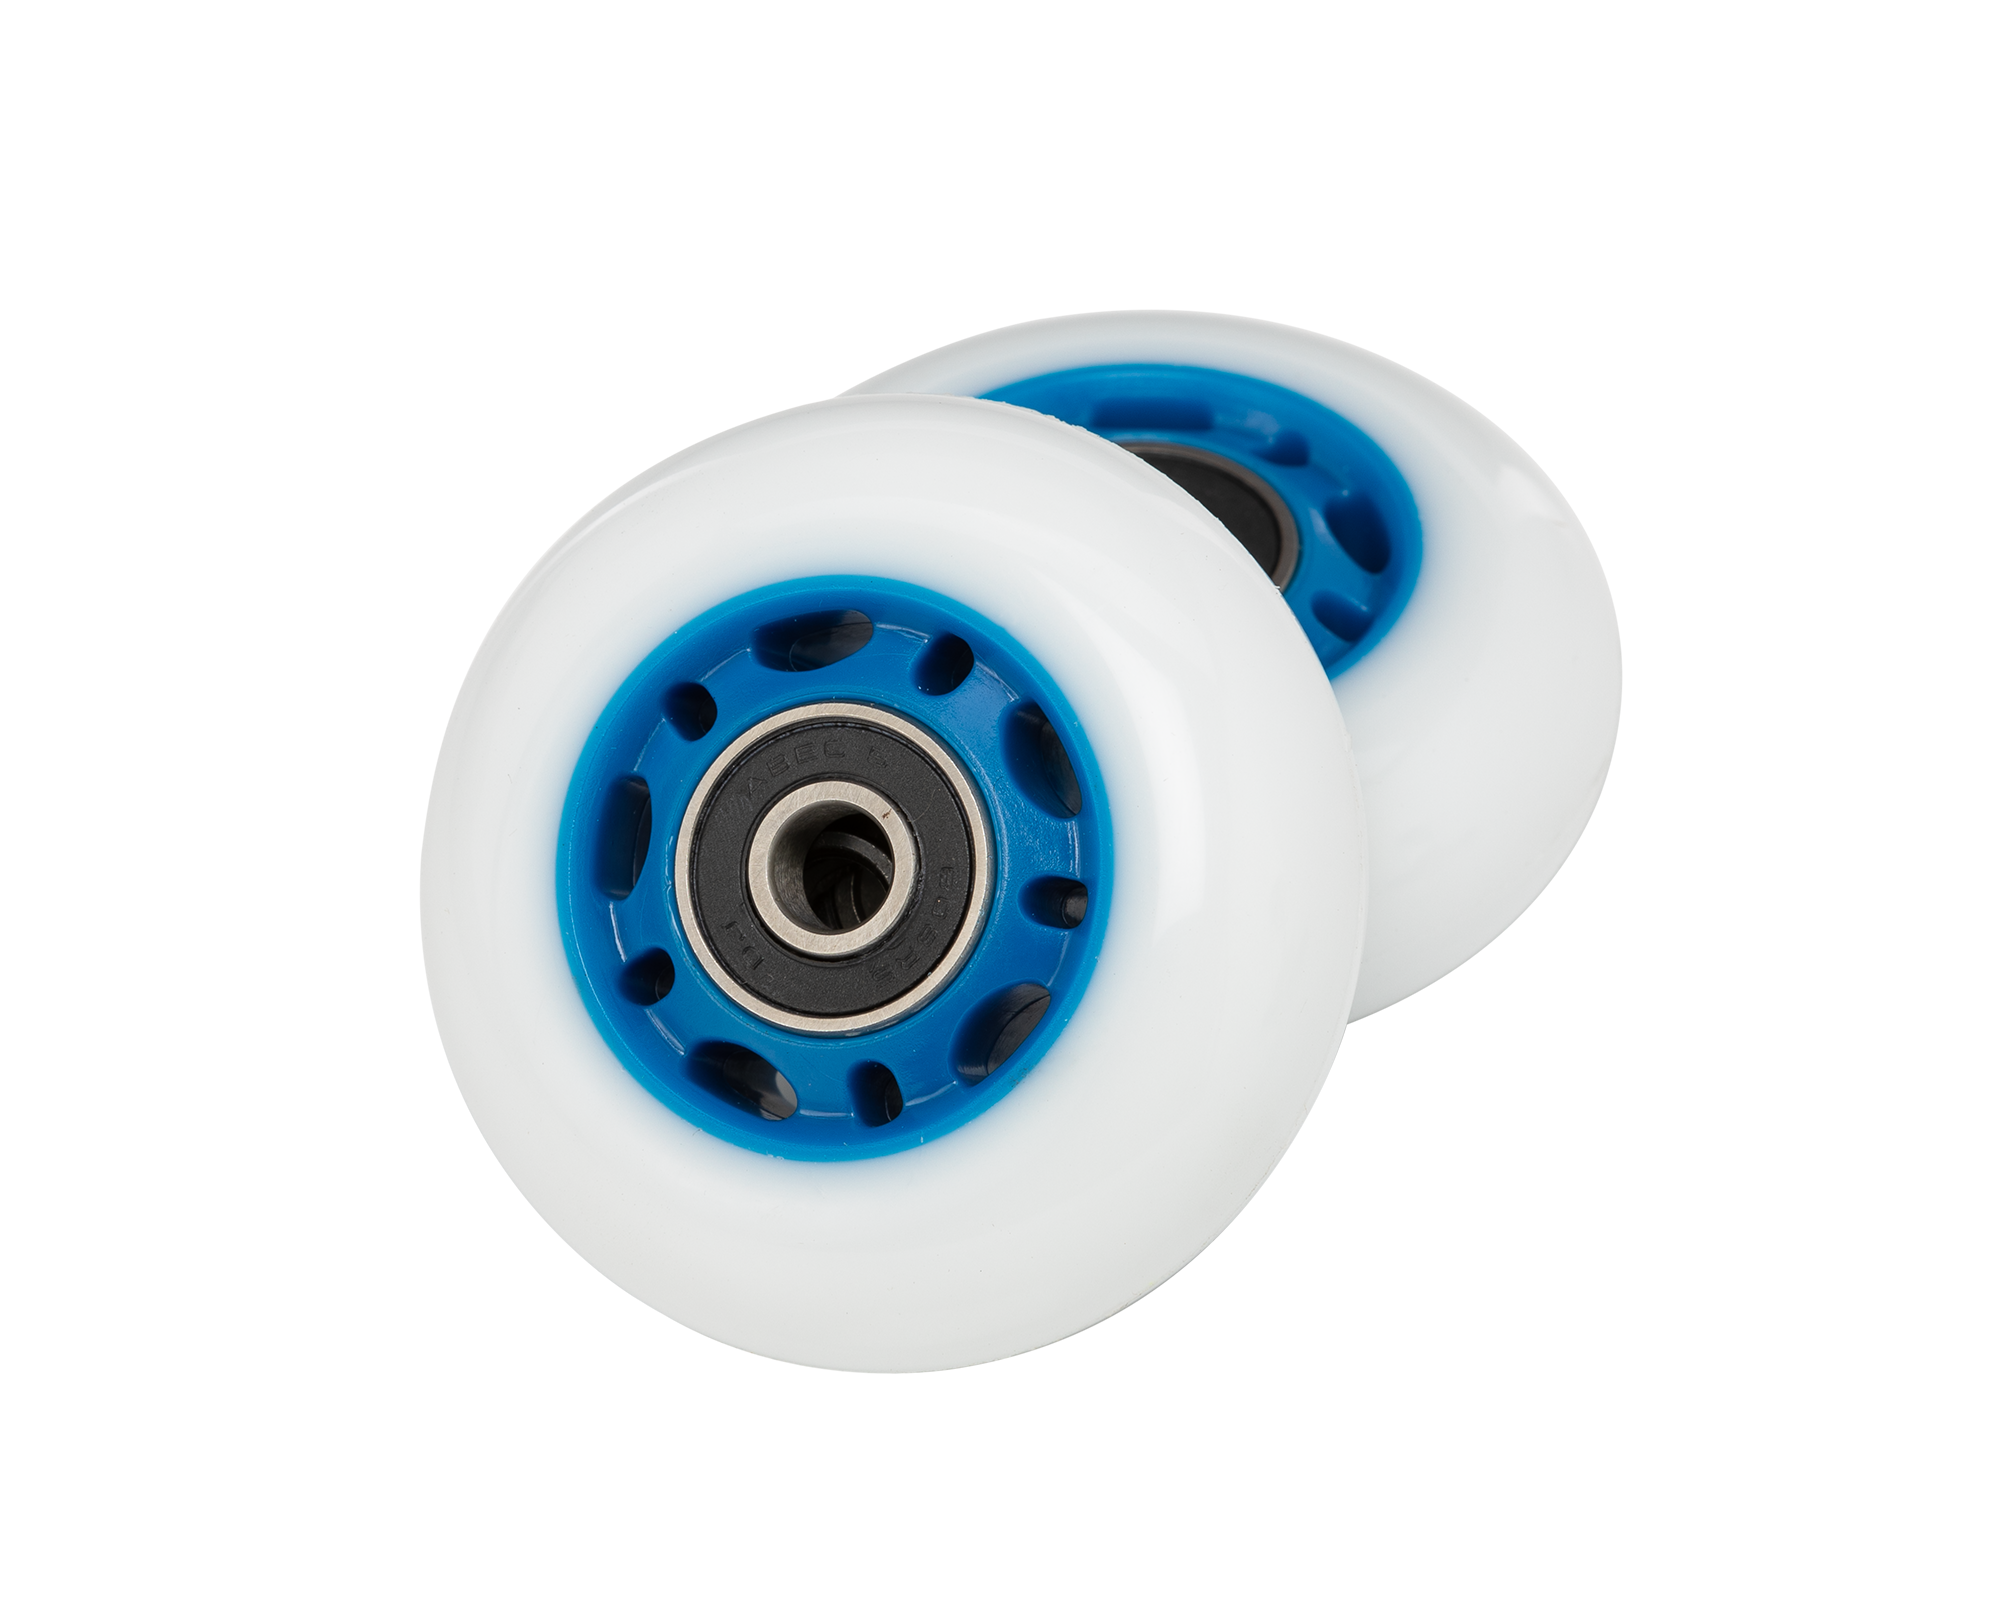 AlveyTech 64 mm Caster Wheels for The Razor PowerWing